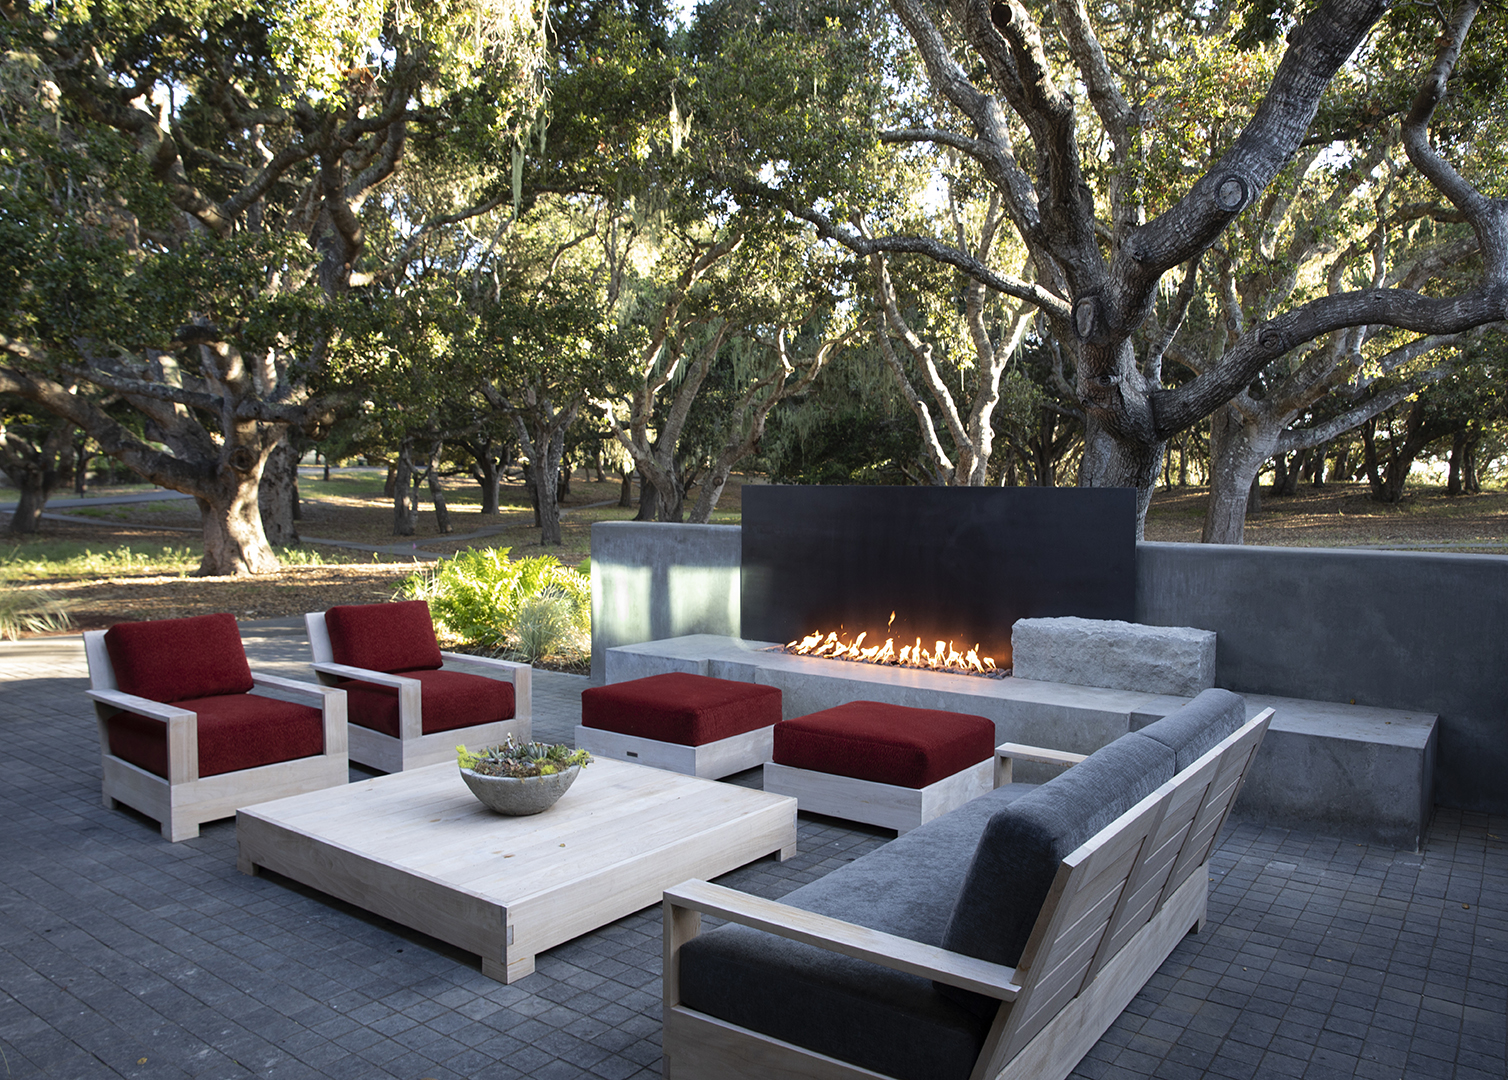 A bosque of trees providing natural shade to an outdoor seating group with red upholstery and an accompanying fire feature